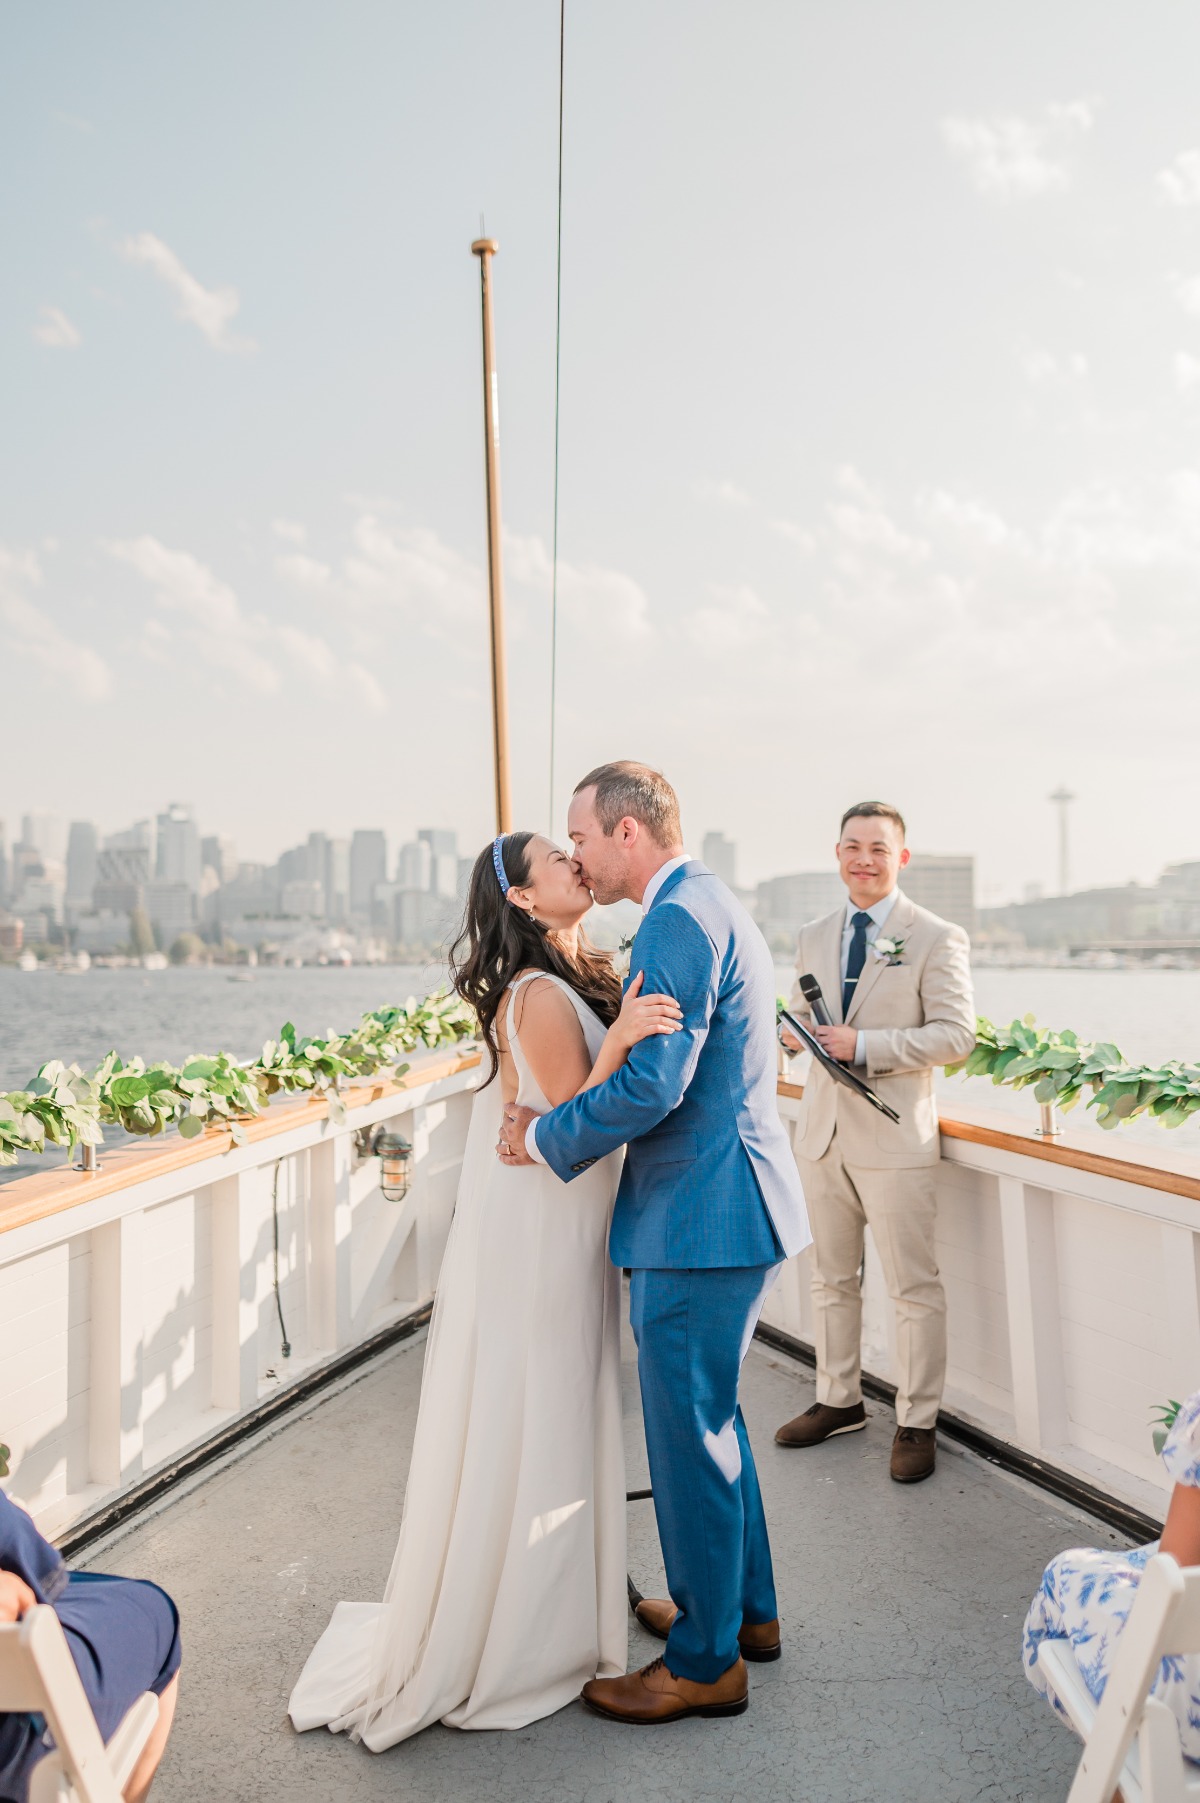 First kiss on boat 